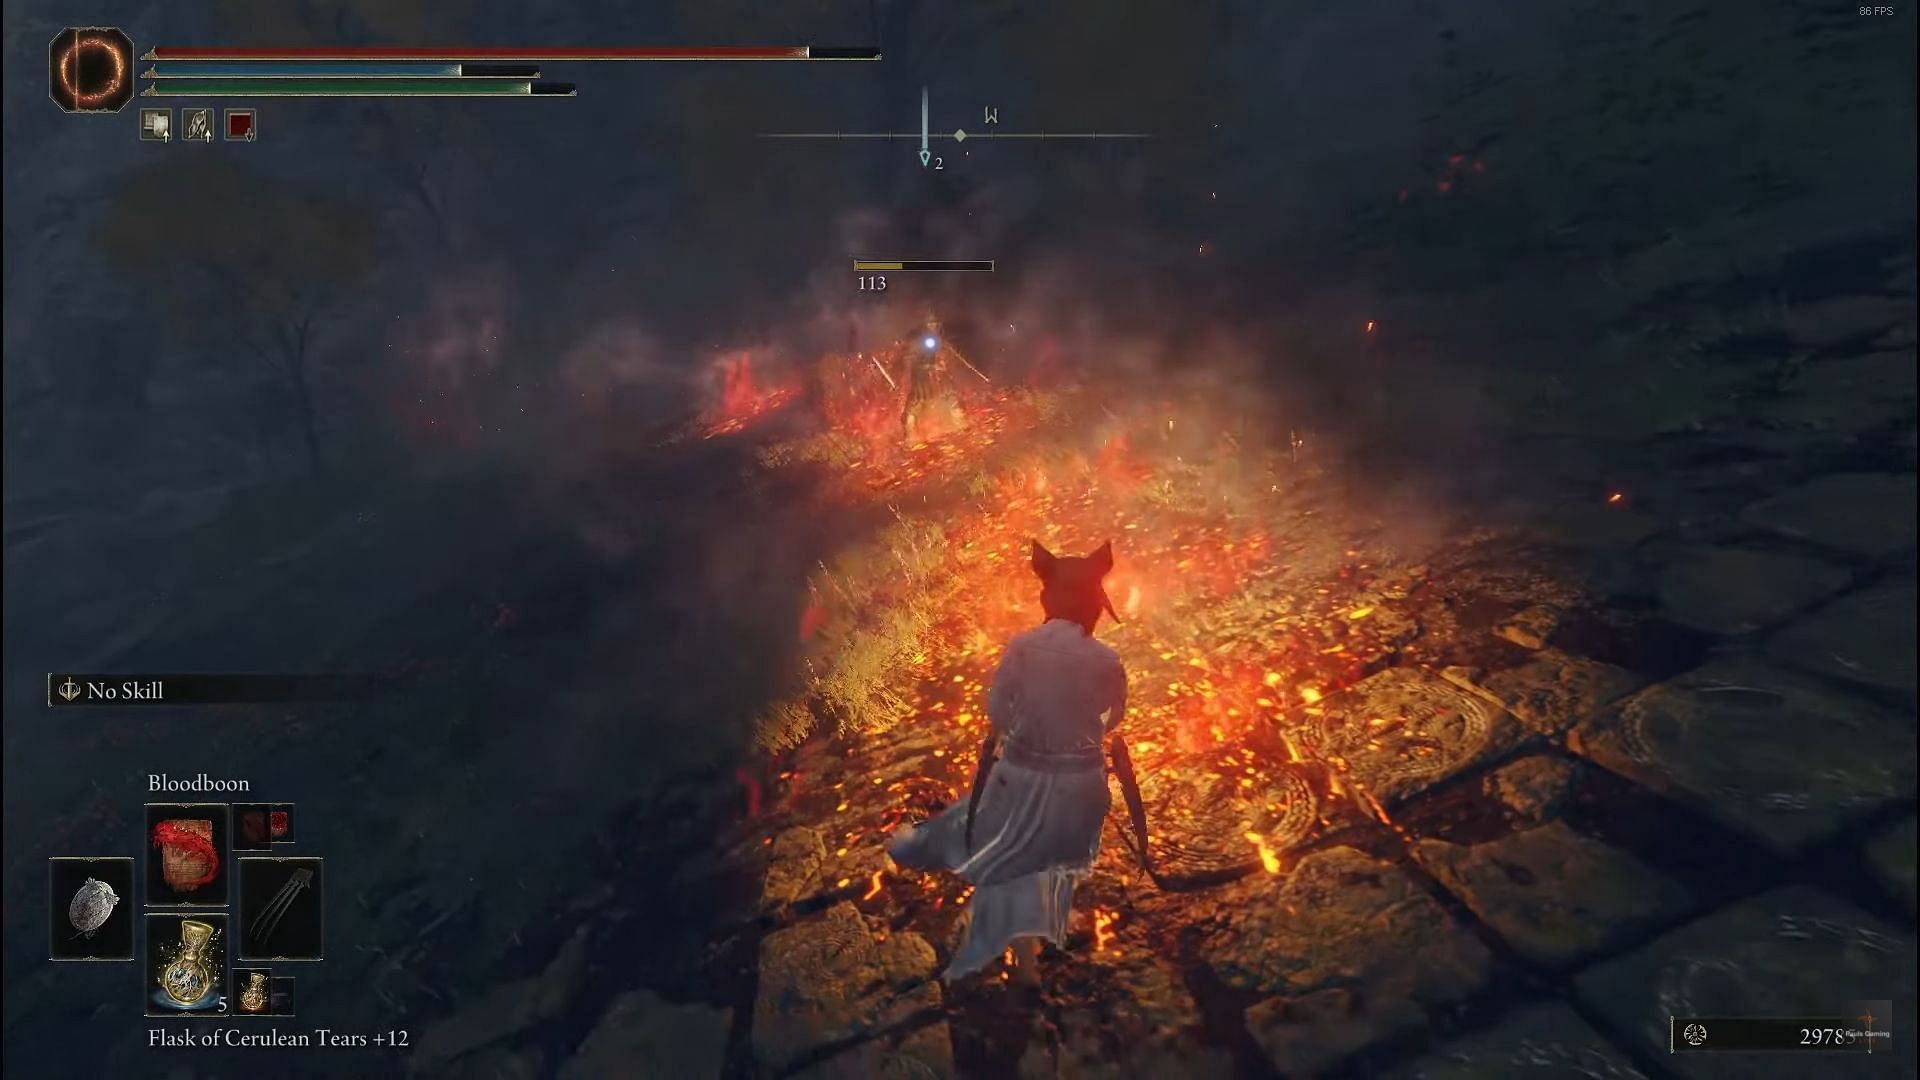 Bloodboon in Elden Ring allows players to splatter blood and deal lots of damage (Image via Pauls Gaming Live/Youtube)